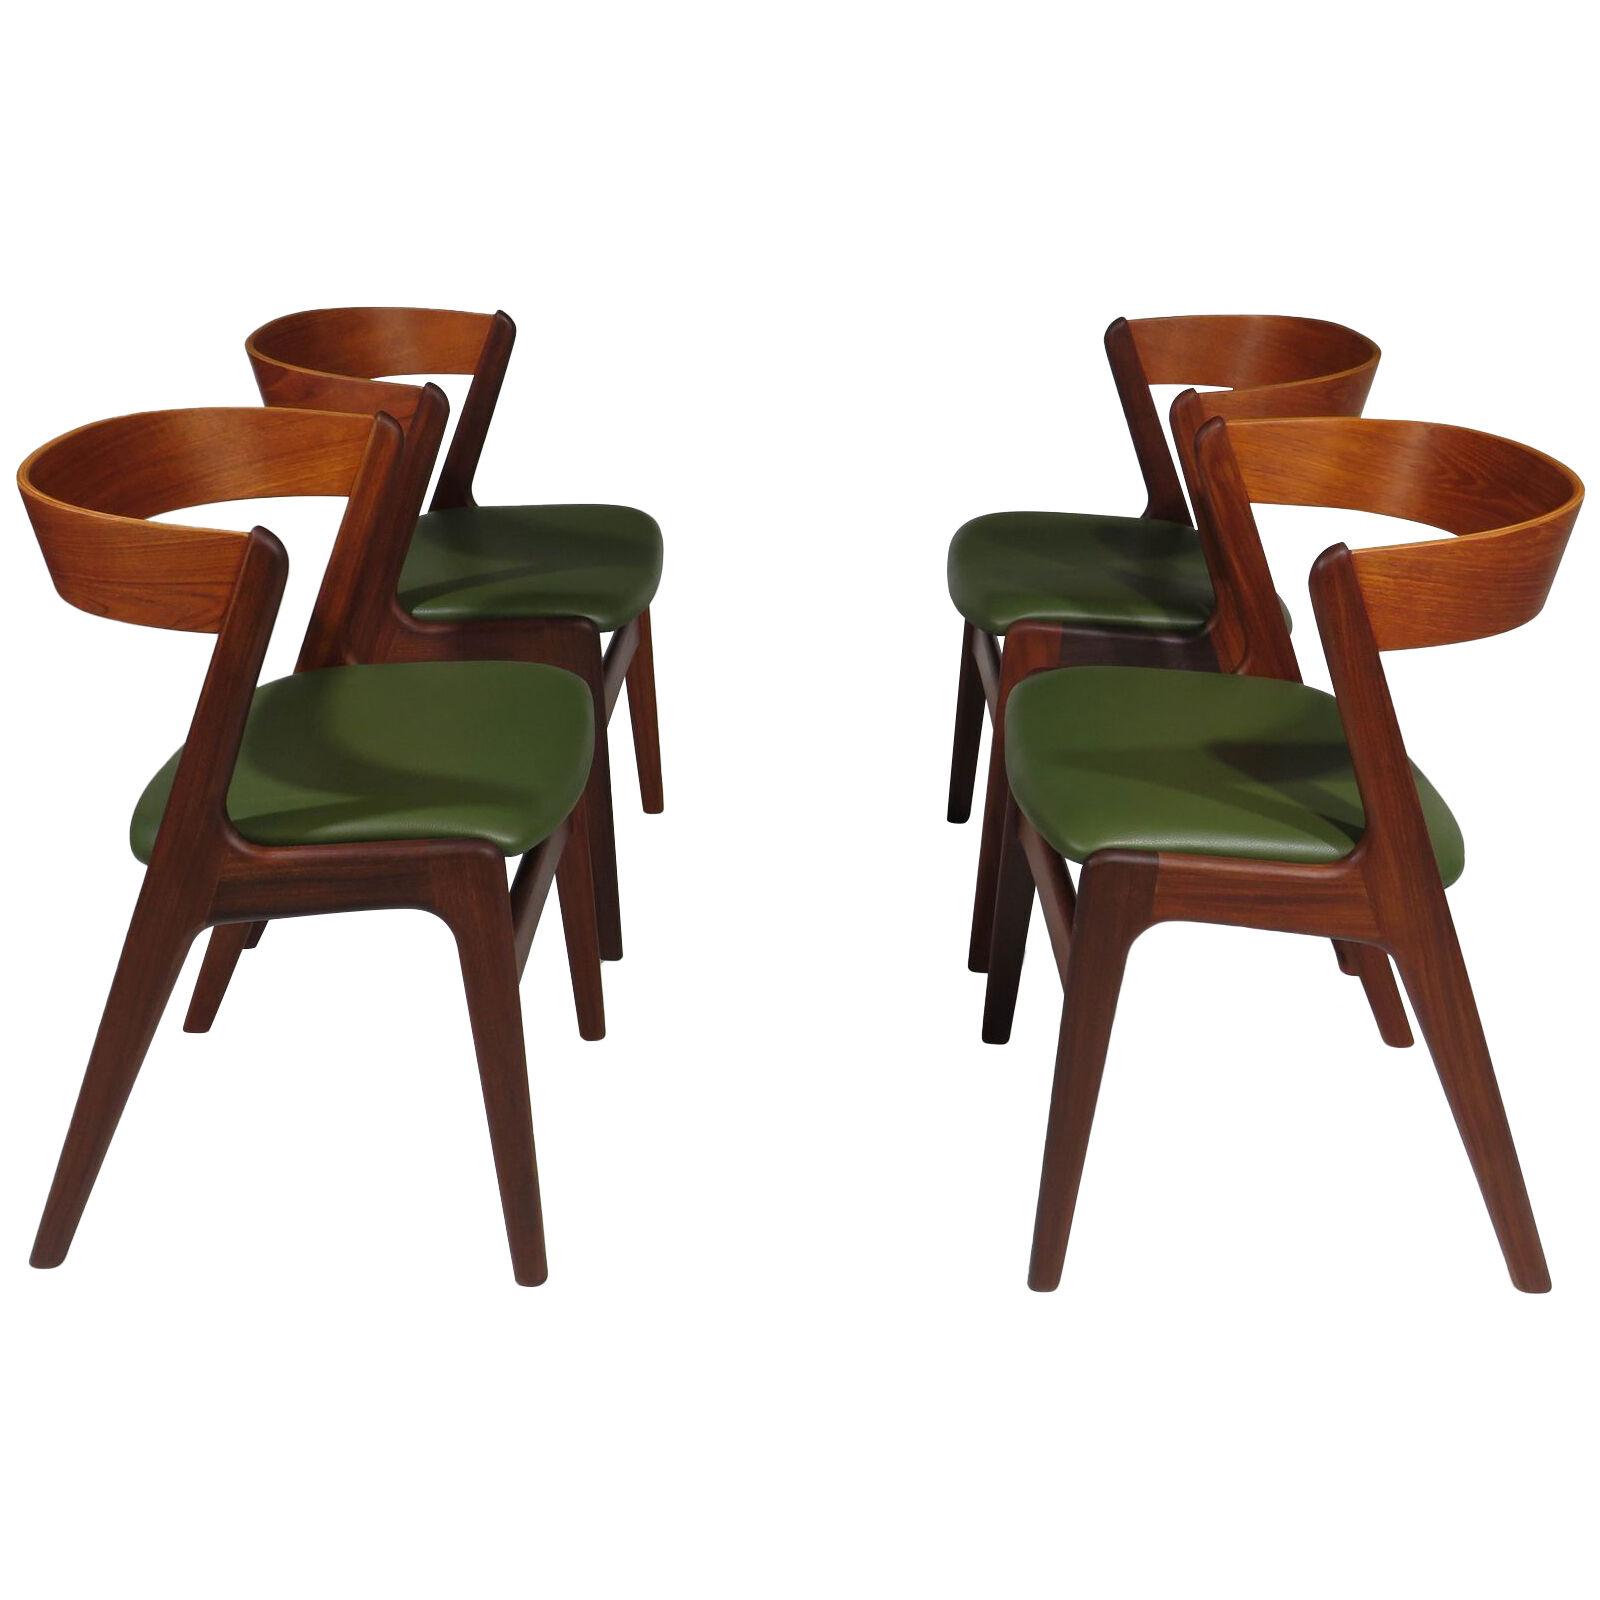 Four Danish Teak Curved Back Dining Chairs